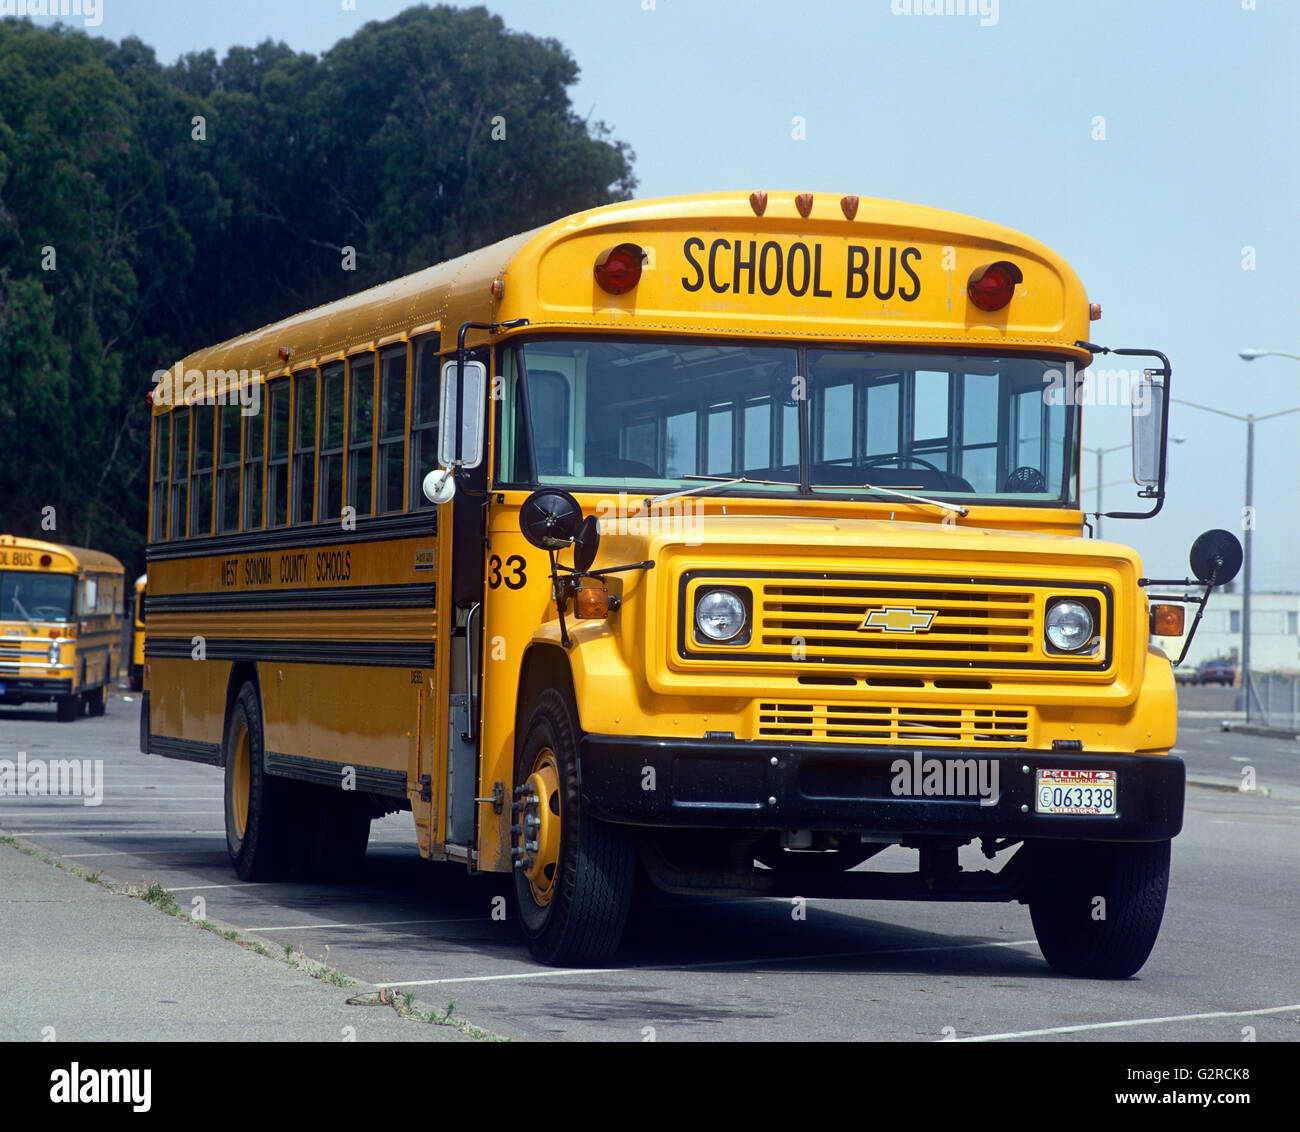 Albums 93+ Images pictures of yellow school buses Sharp